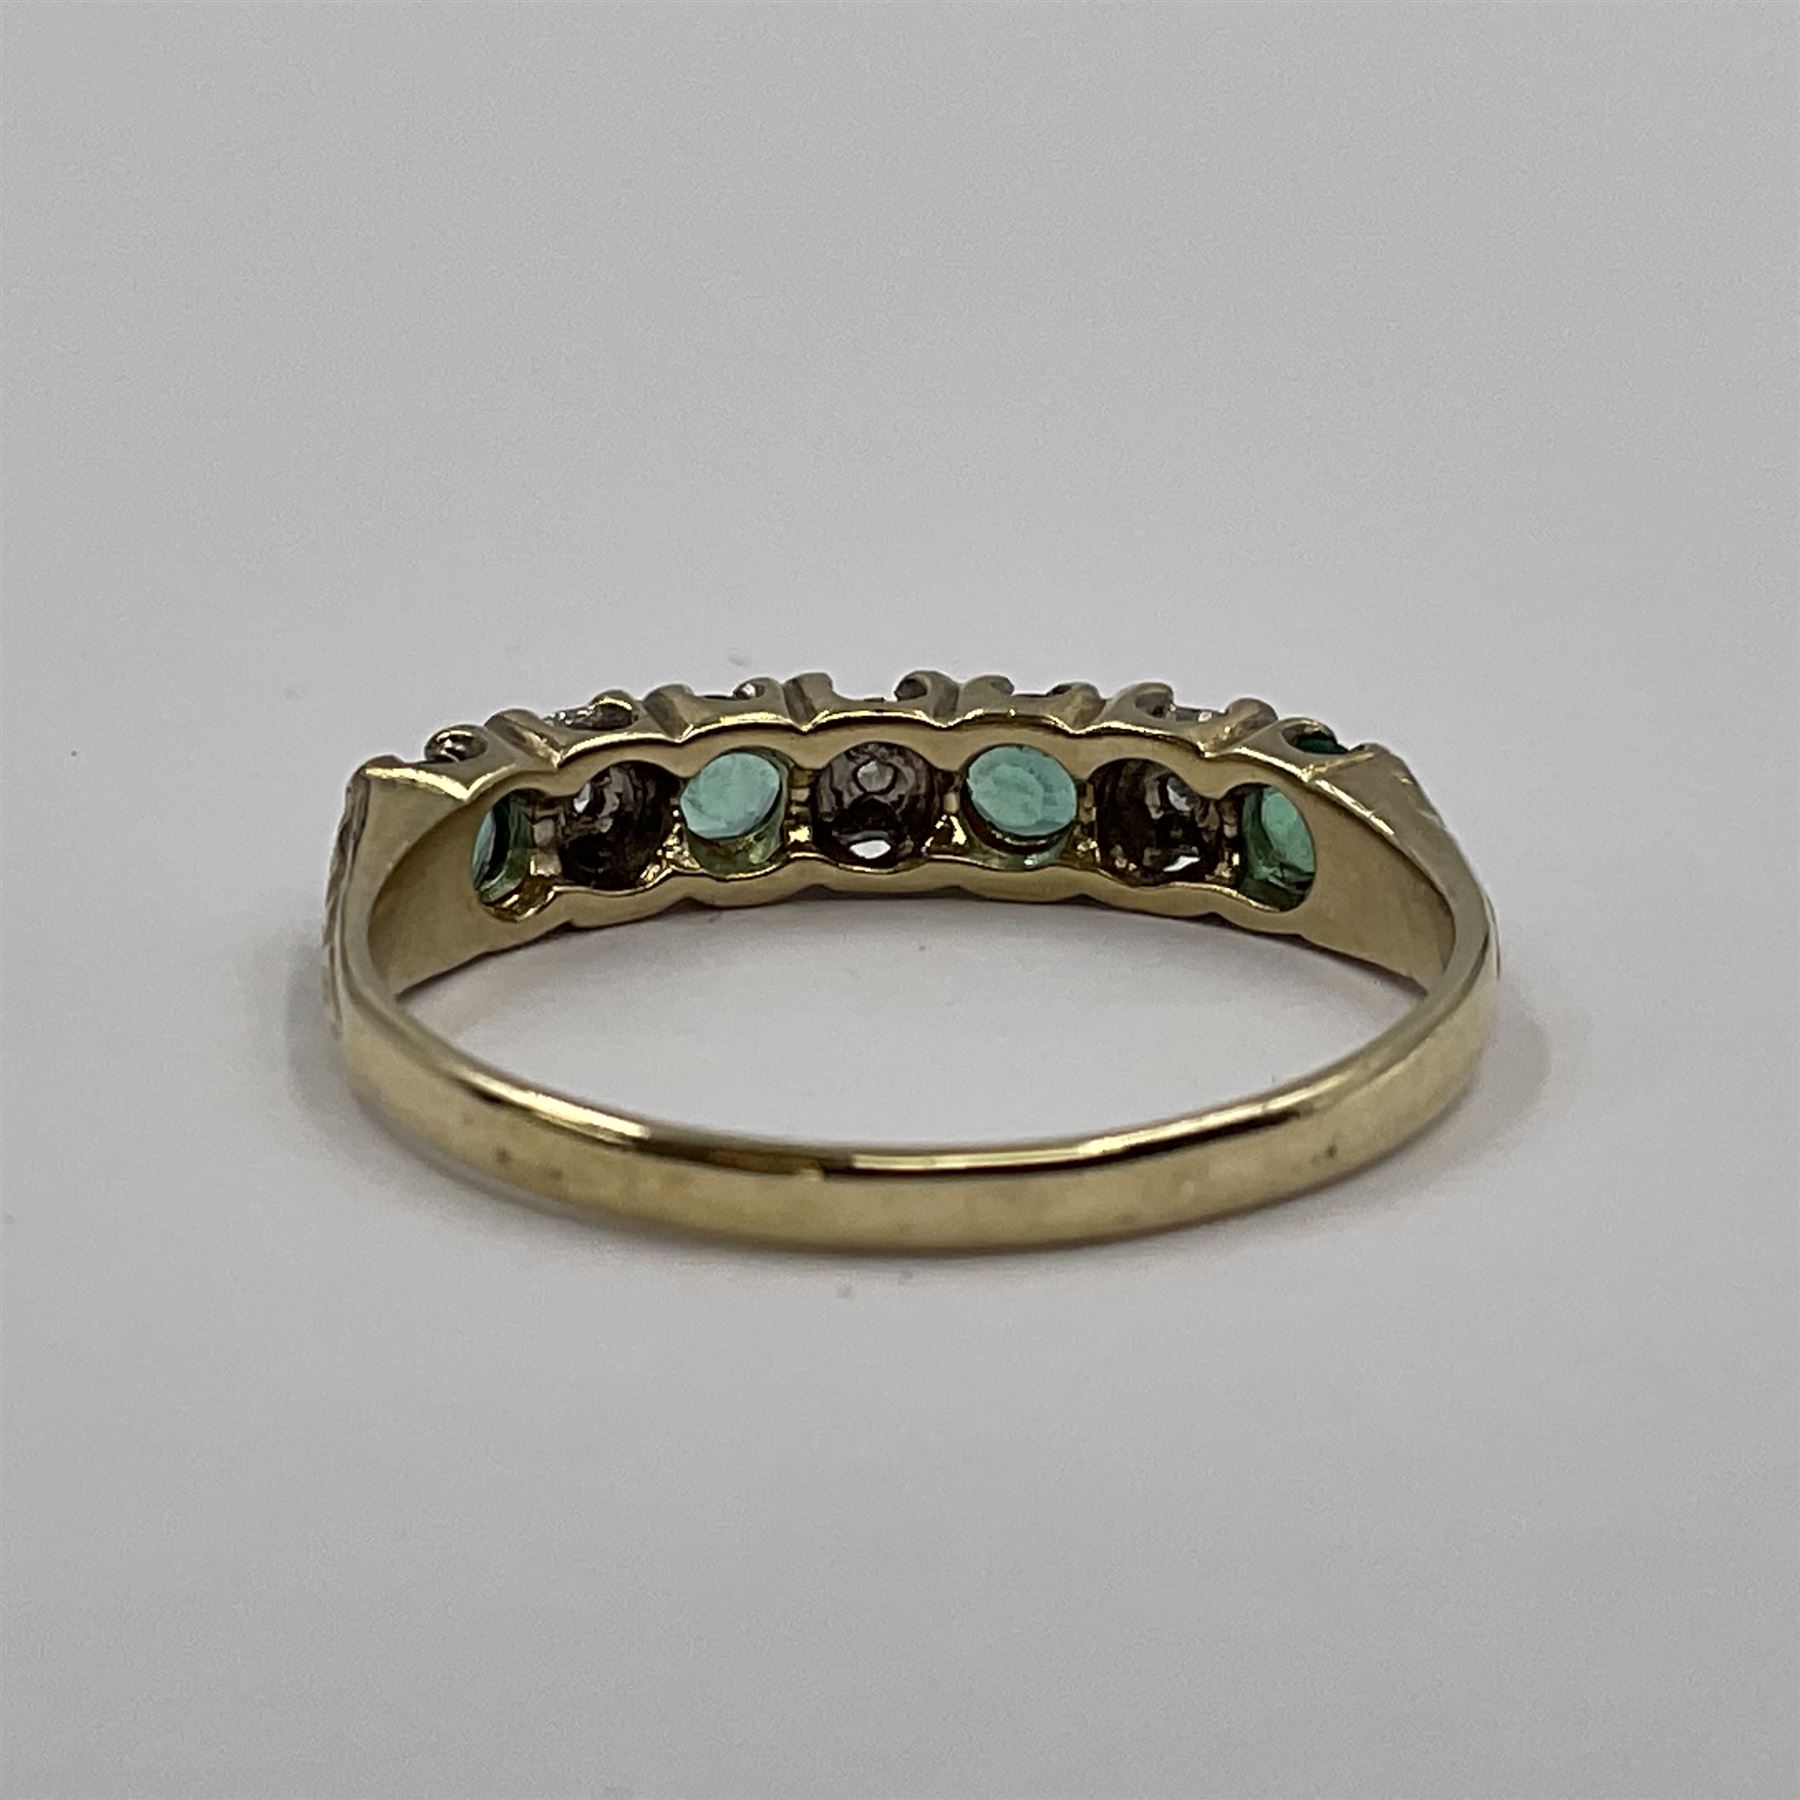 9ct gold seven stone emerald and diamond half eternity ring - Image 3 of 3